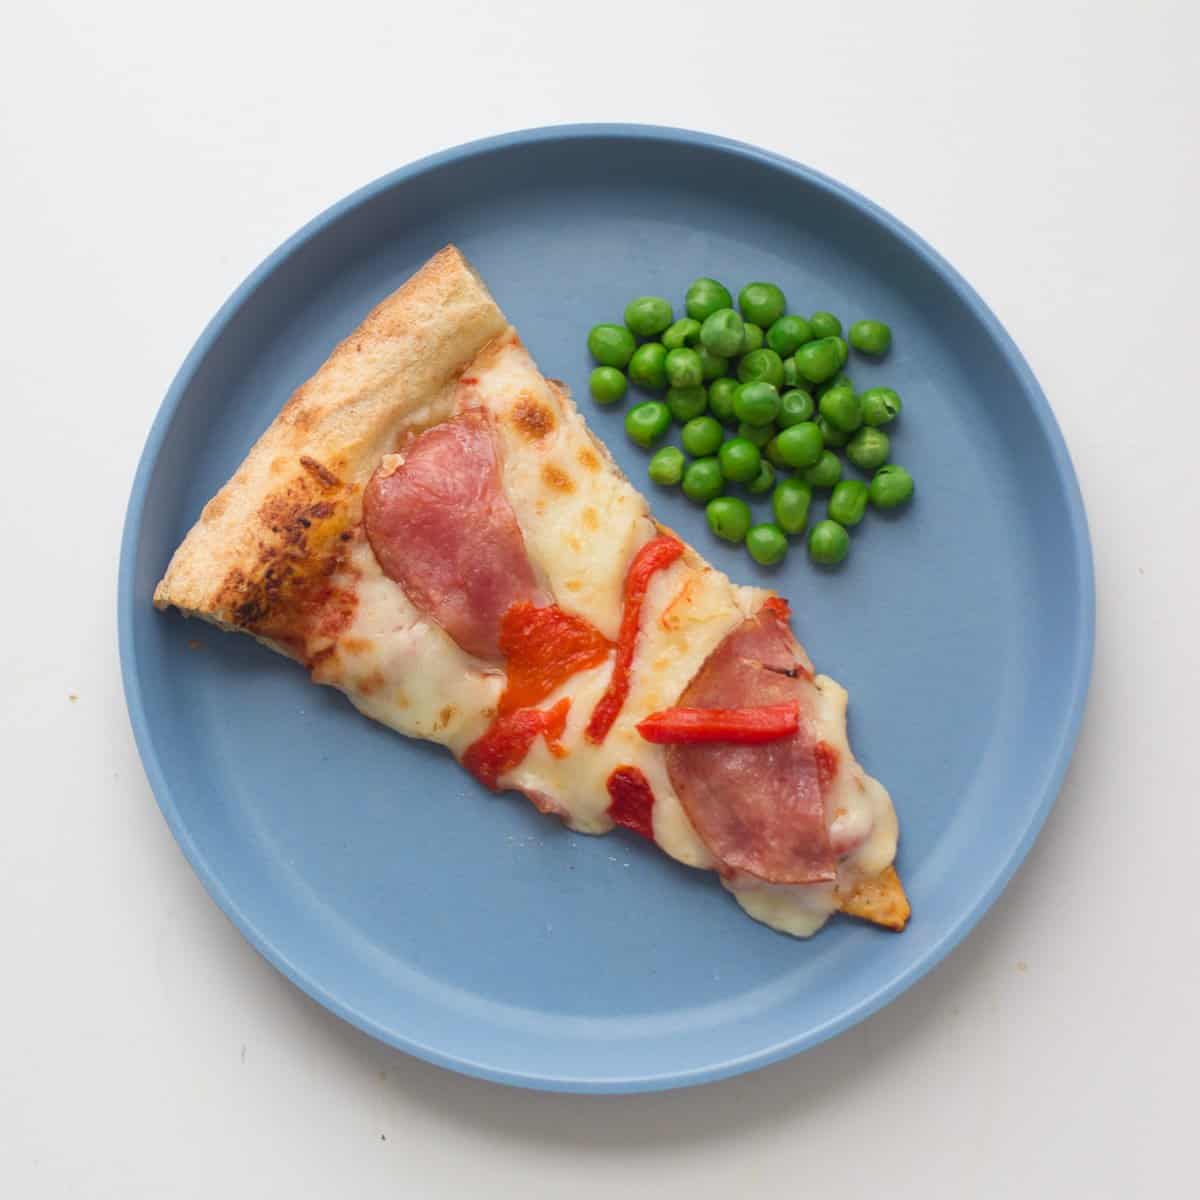 A slice of pizza with frozen peas.